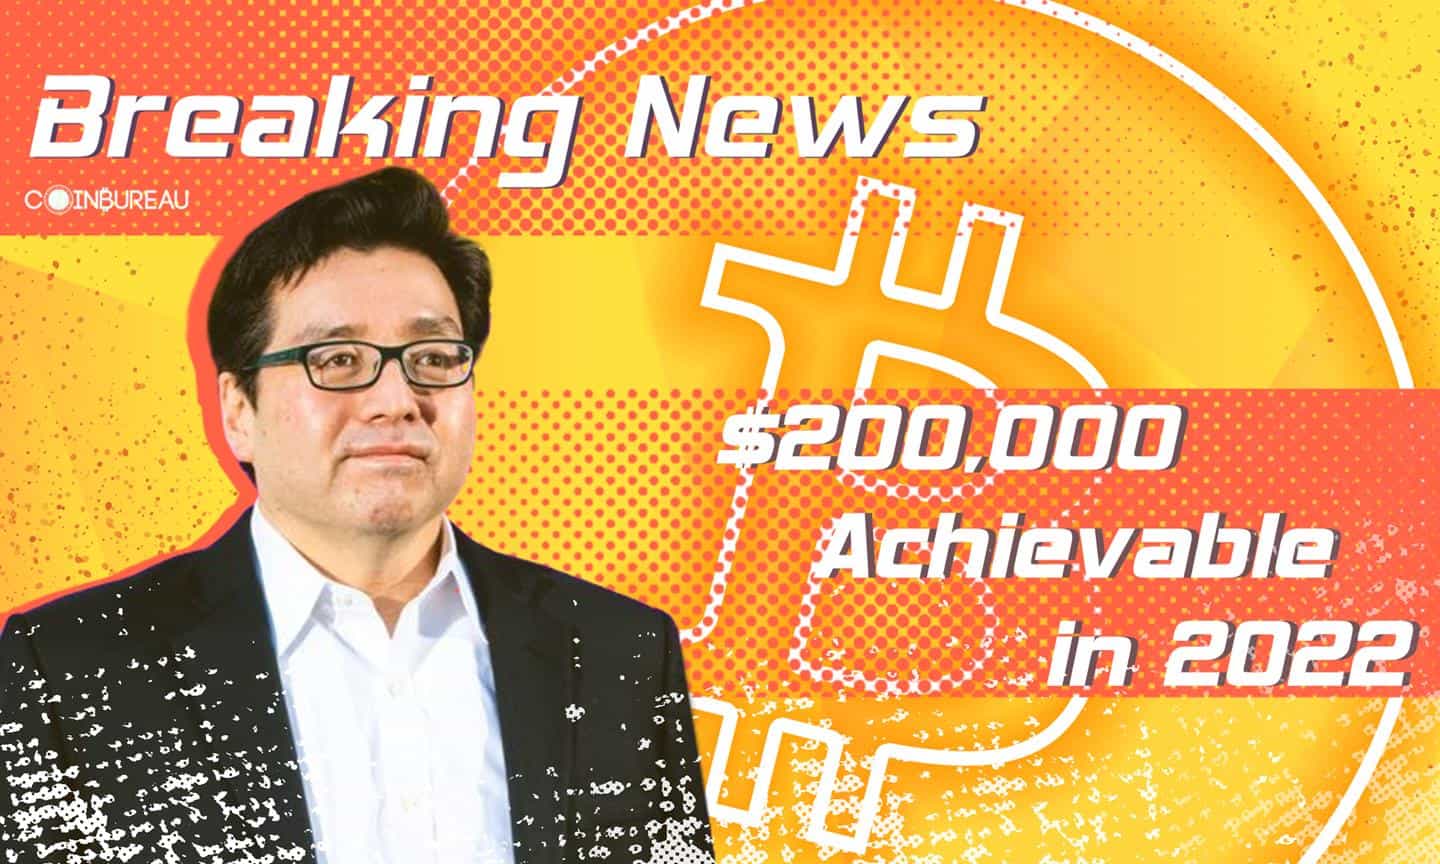 Hedge Fund Manager Tom Lee Says $200,000 BTC ‘Achievable’ in 2022